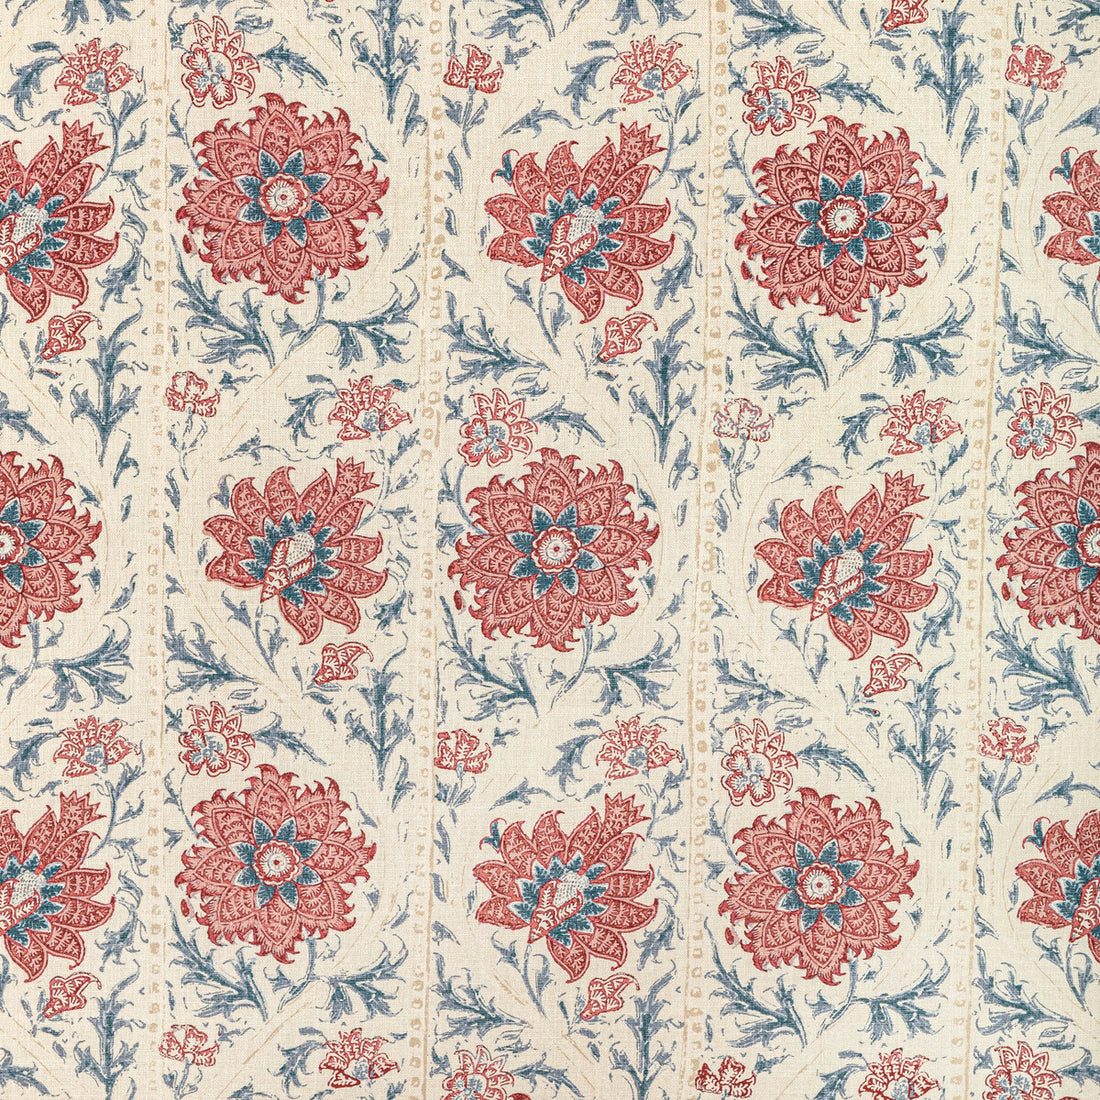 Calico Vine fabric in blue red color - pattern 2022102.195.0 - by Lee Jofa in the Sarah Bartholomew collection